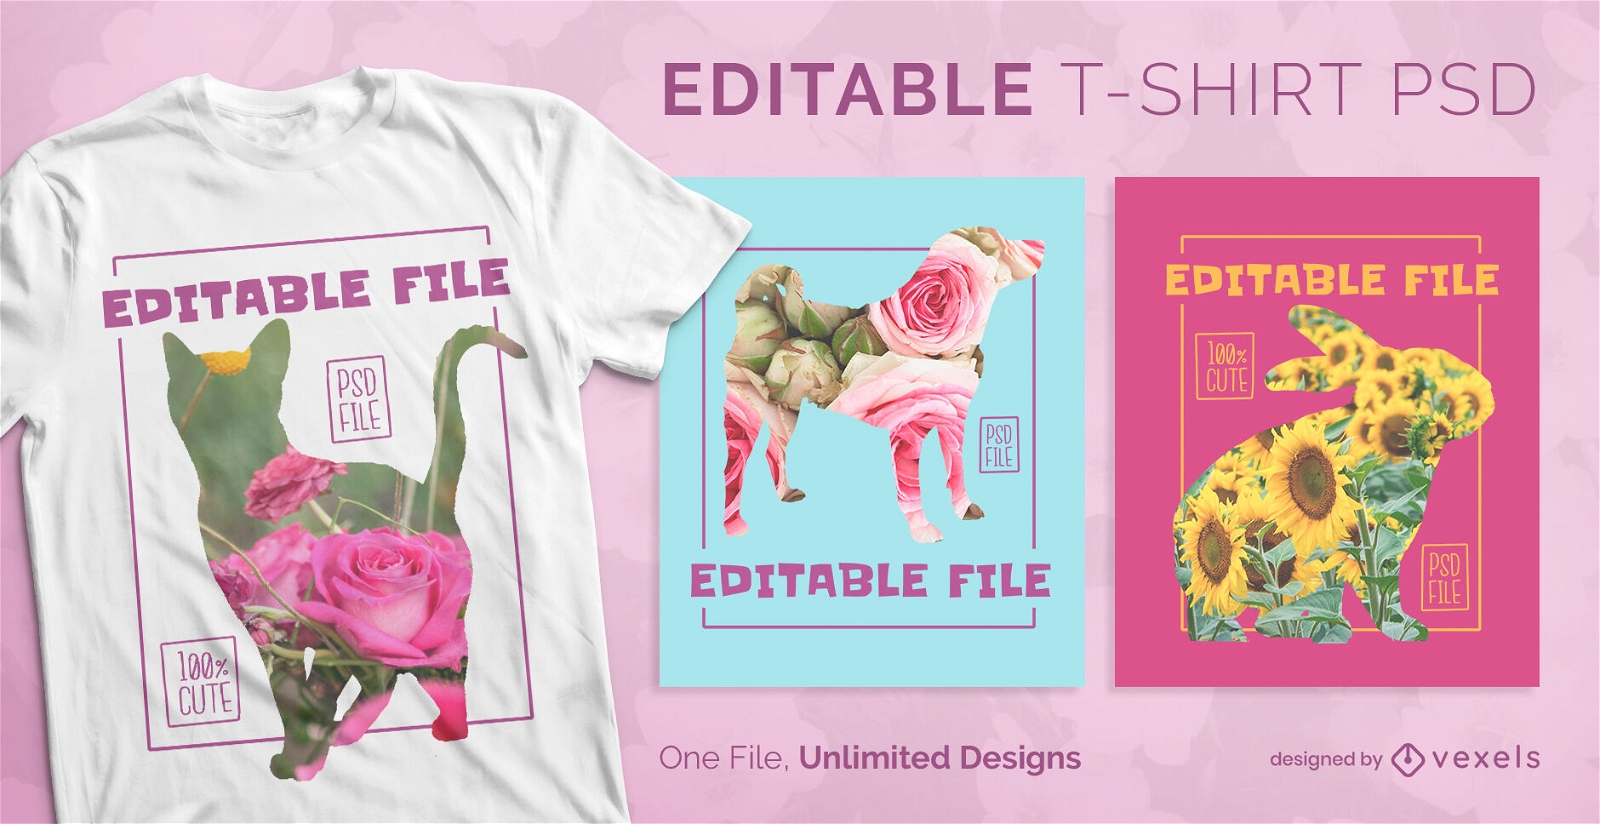 Floral animals scalable t-shirt psd